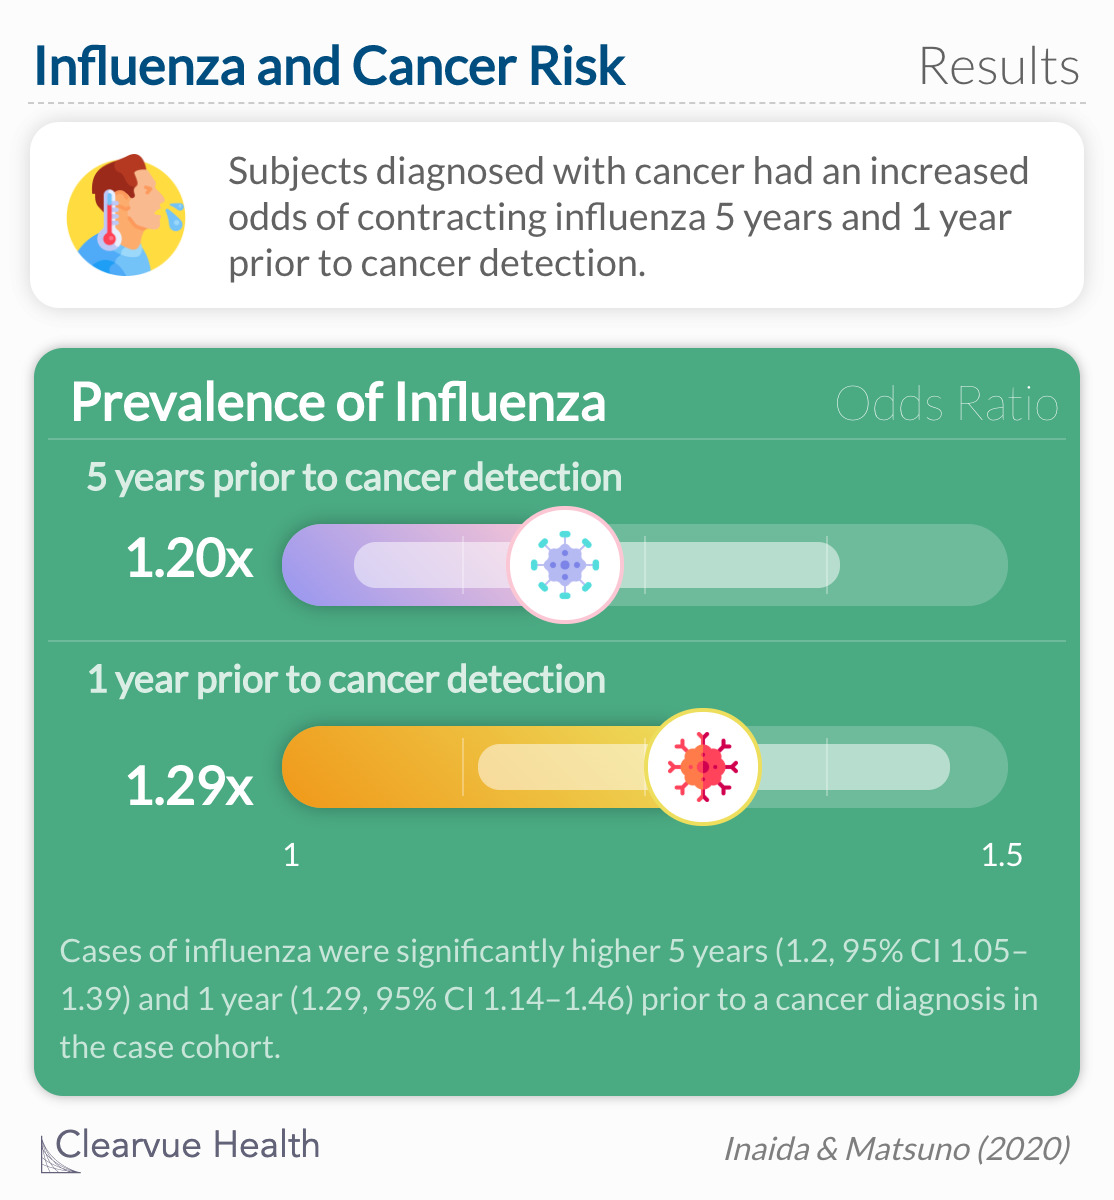  In influenza infections, significant ORs were found only in the 2nd and 6th years before cancer diagnosis. 